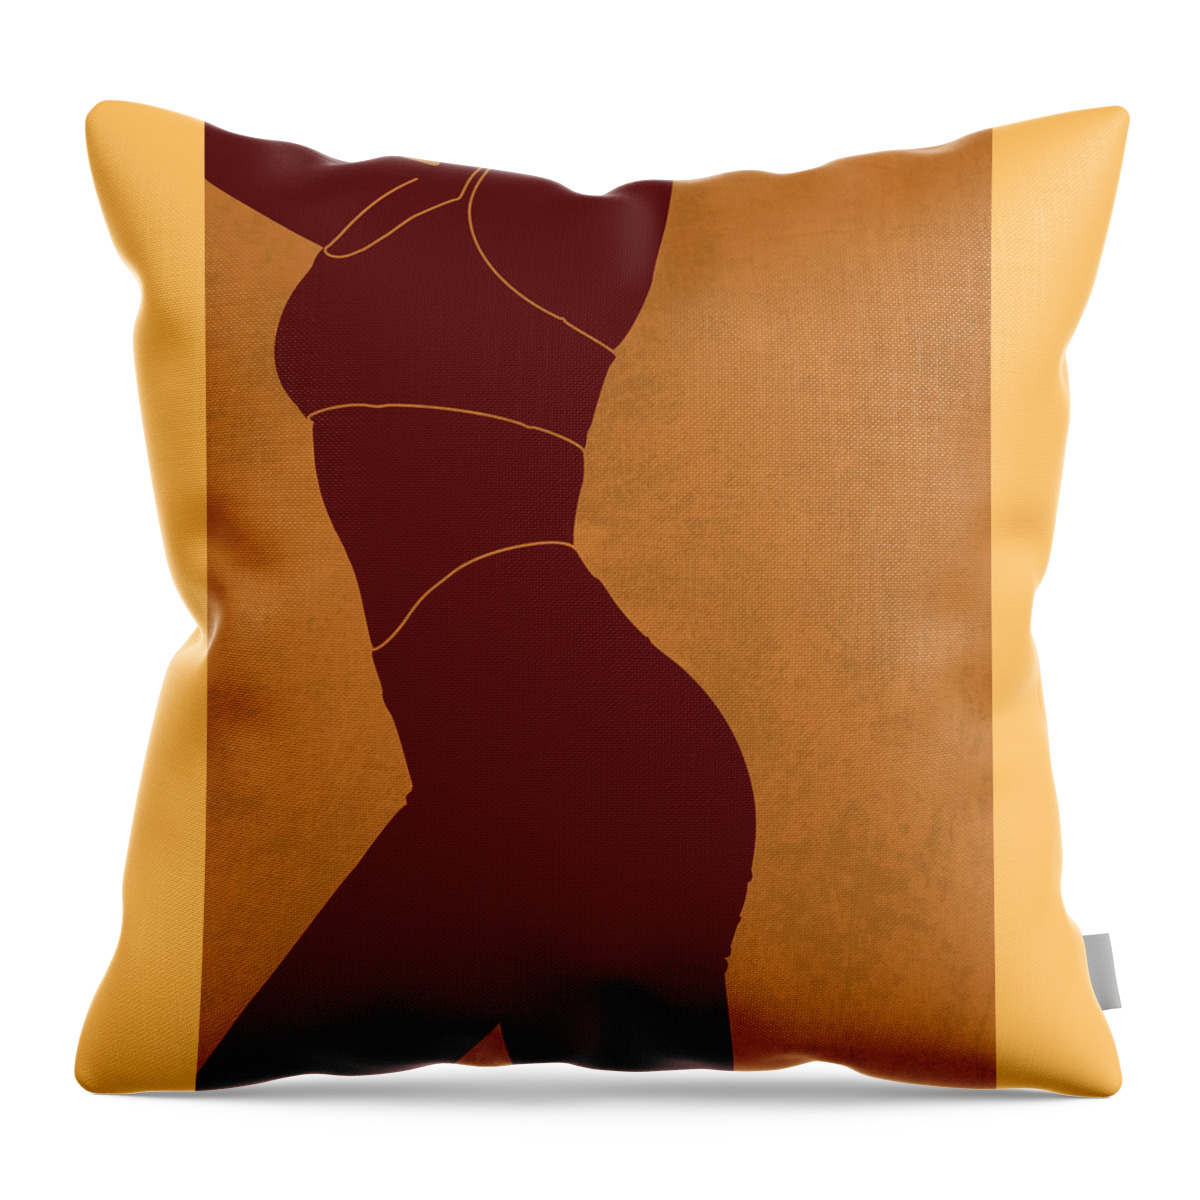 Female Figure Throw Pillow featuring the mixed media Aesthetique - Female Figure - Minimal Contemporary Abstract 03 by Studio Grafiikka